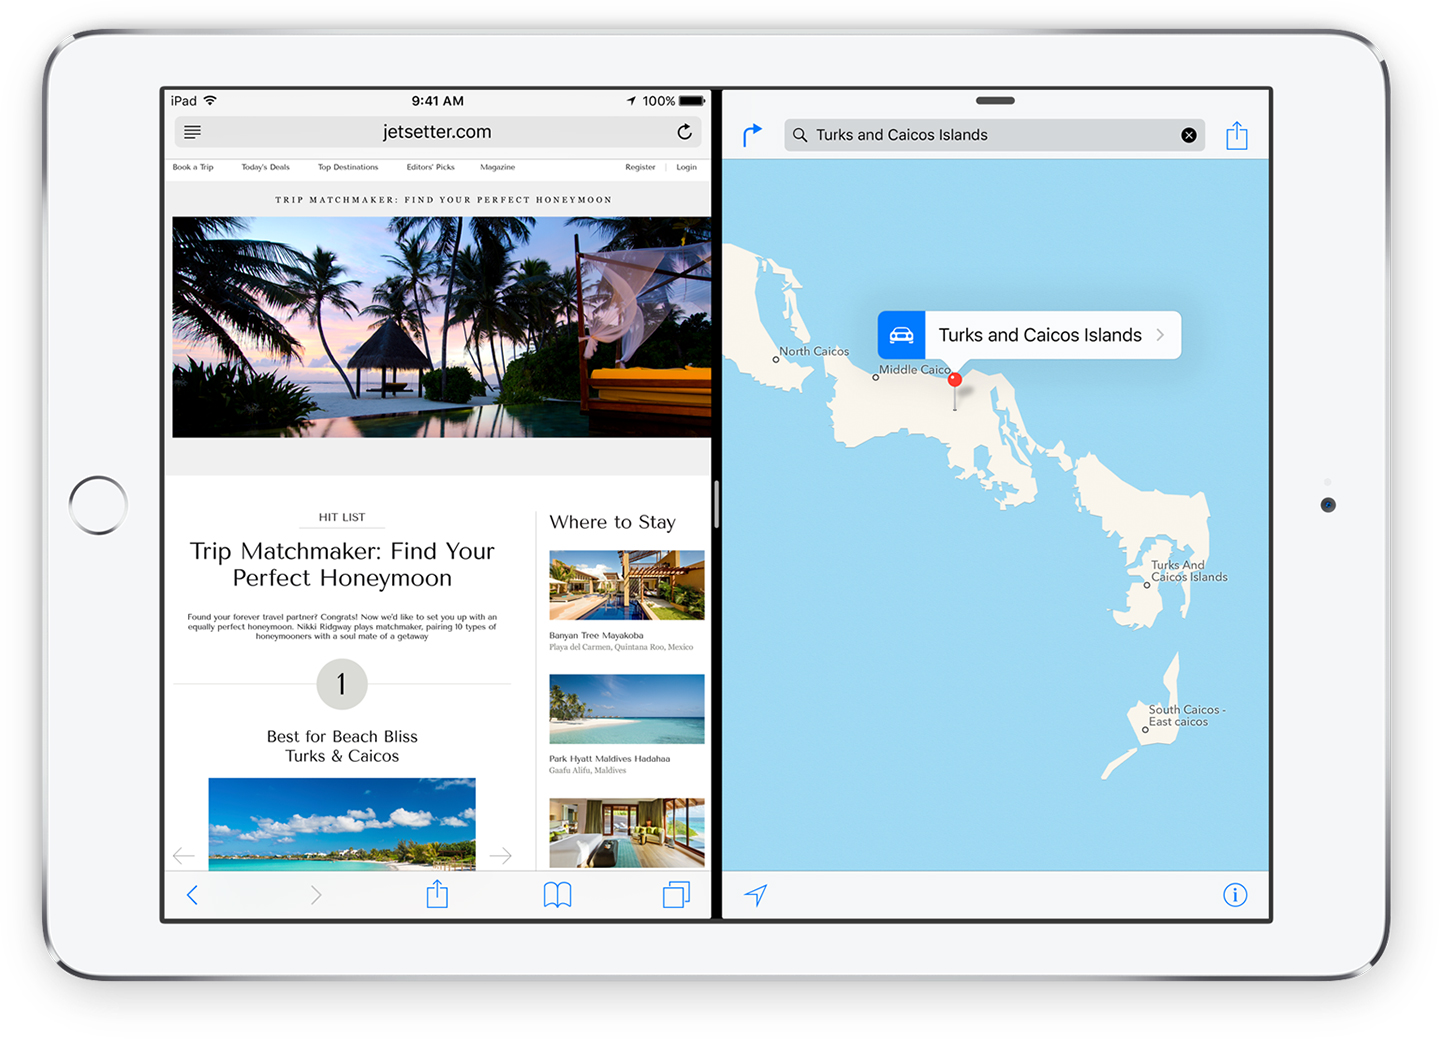 Fifth beta version of iOS 9 and watchOS 2 are available to developers [atualizado: para beta testers também]